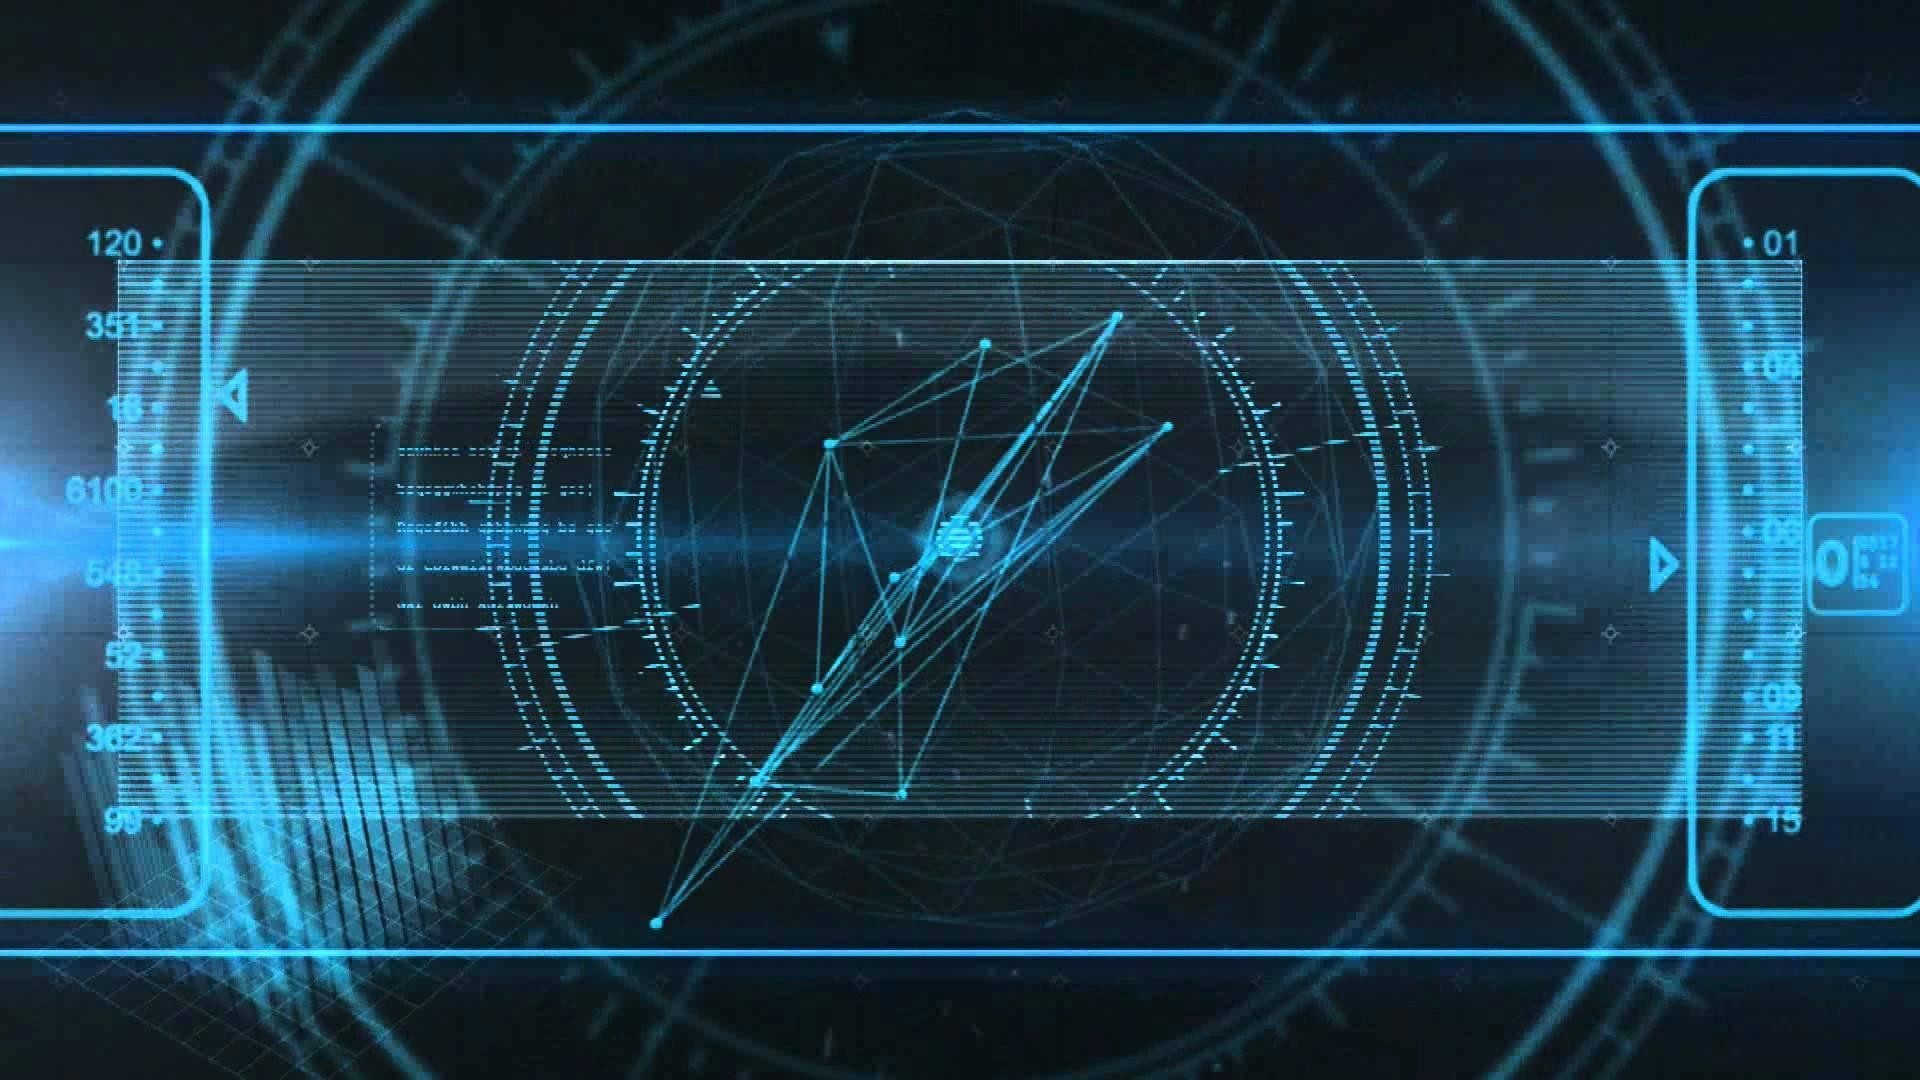 Cool Tech Backgrounds (55+ images)